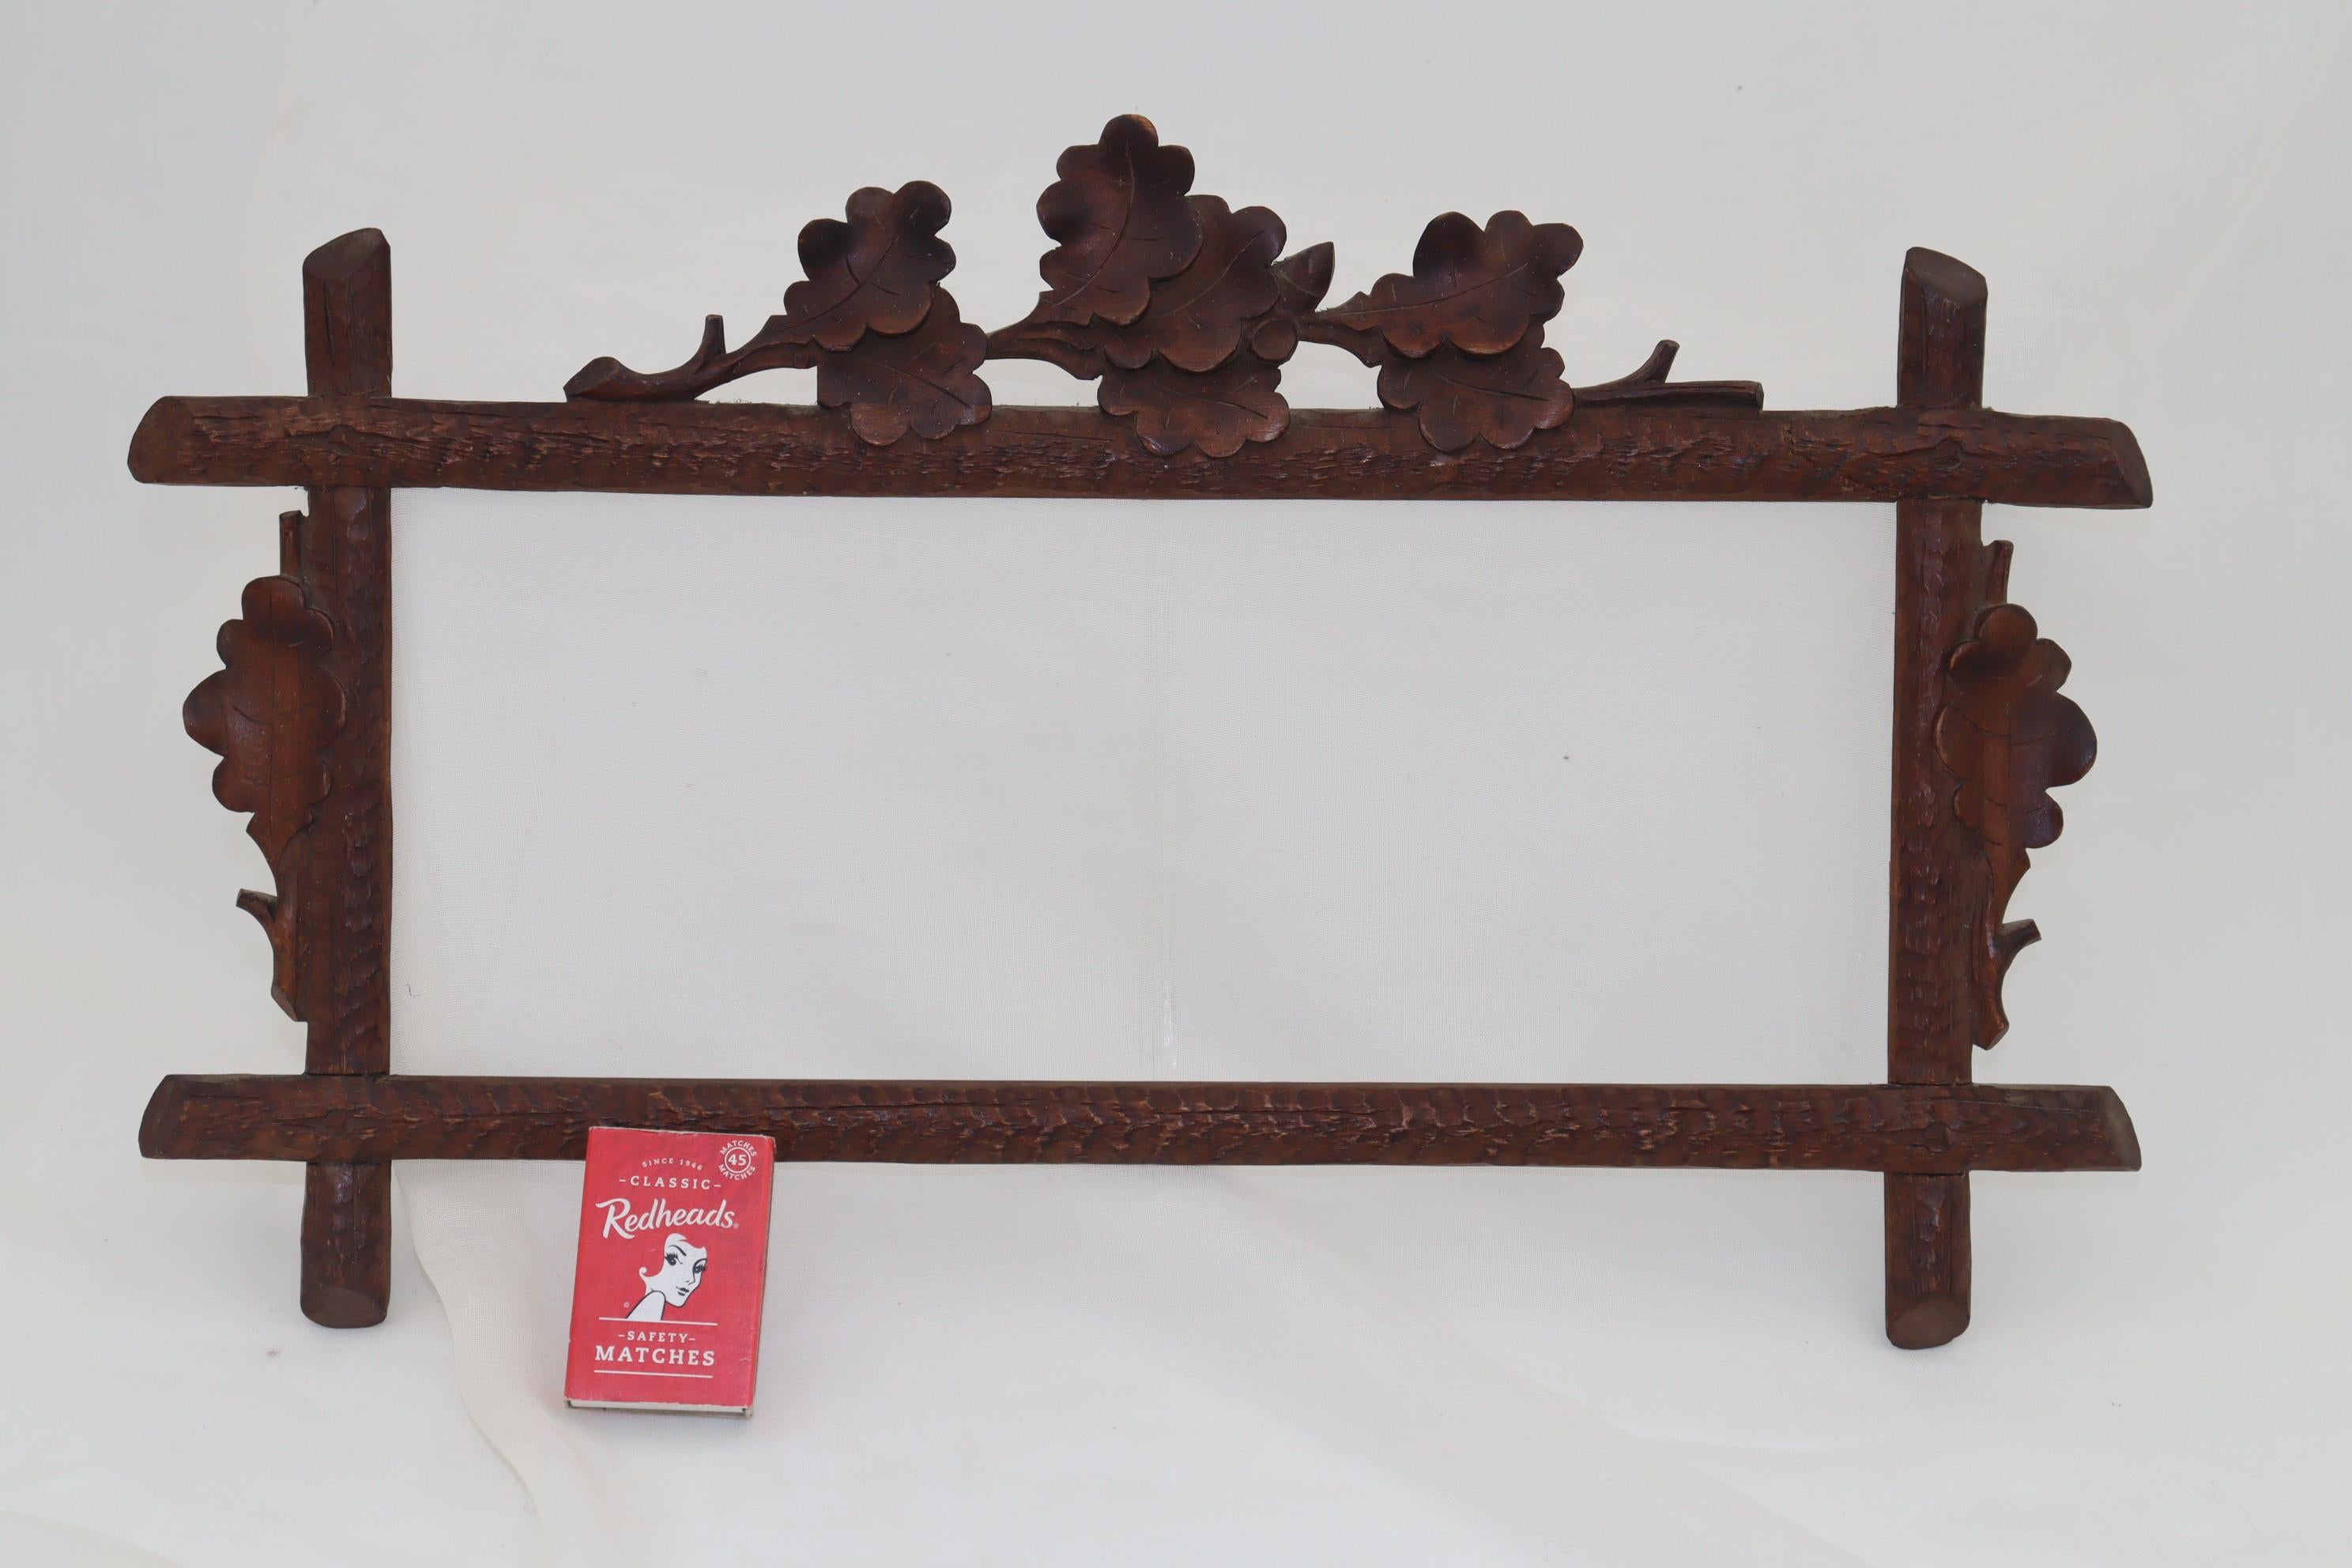 This small rectangular Black Forest picture frame has the sides carved to represent rough textured bark and is adorned with applied oak leaves on three sides. This would allow it to either hang on a wall or be supported on a stand. The width is 405